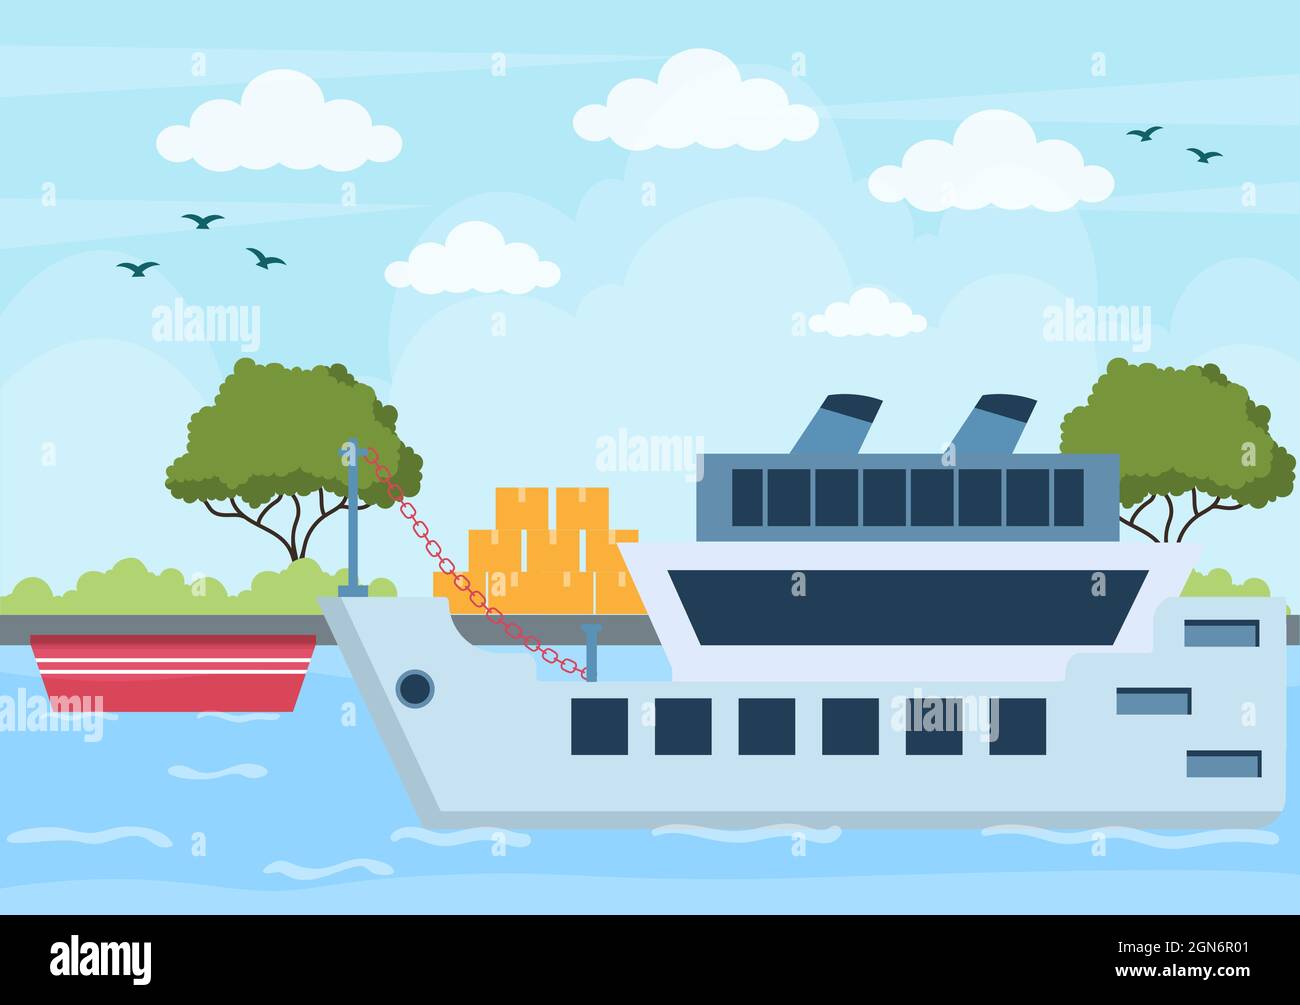 Cargo Shipping Container Logistics Delivery with the Concept of Delivering Goods Using Crane Ship, Truck or Plane Transportation. Background Vector Stock Vector